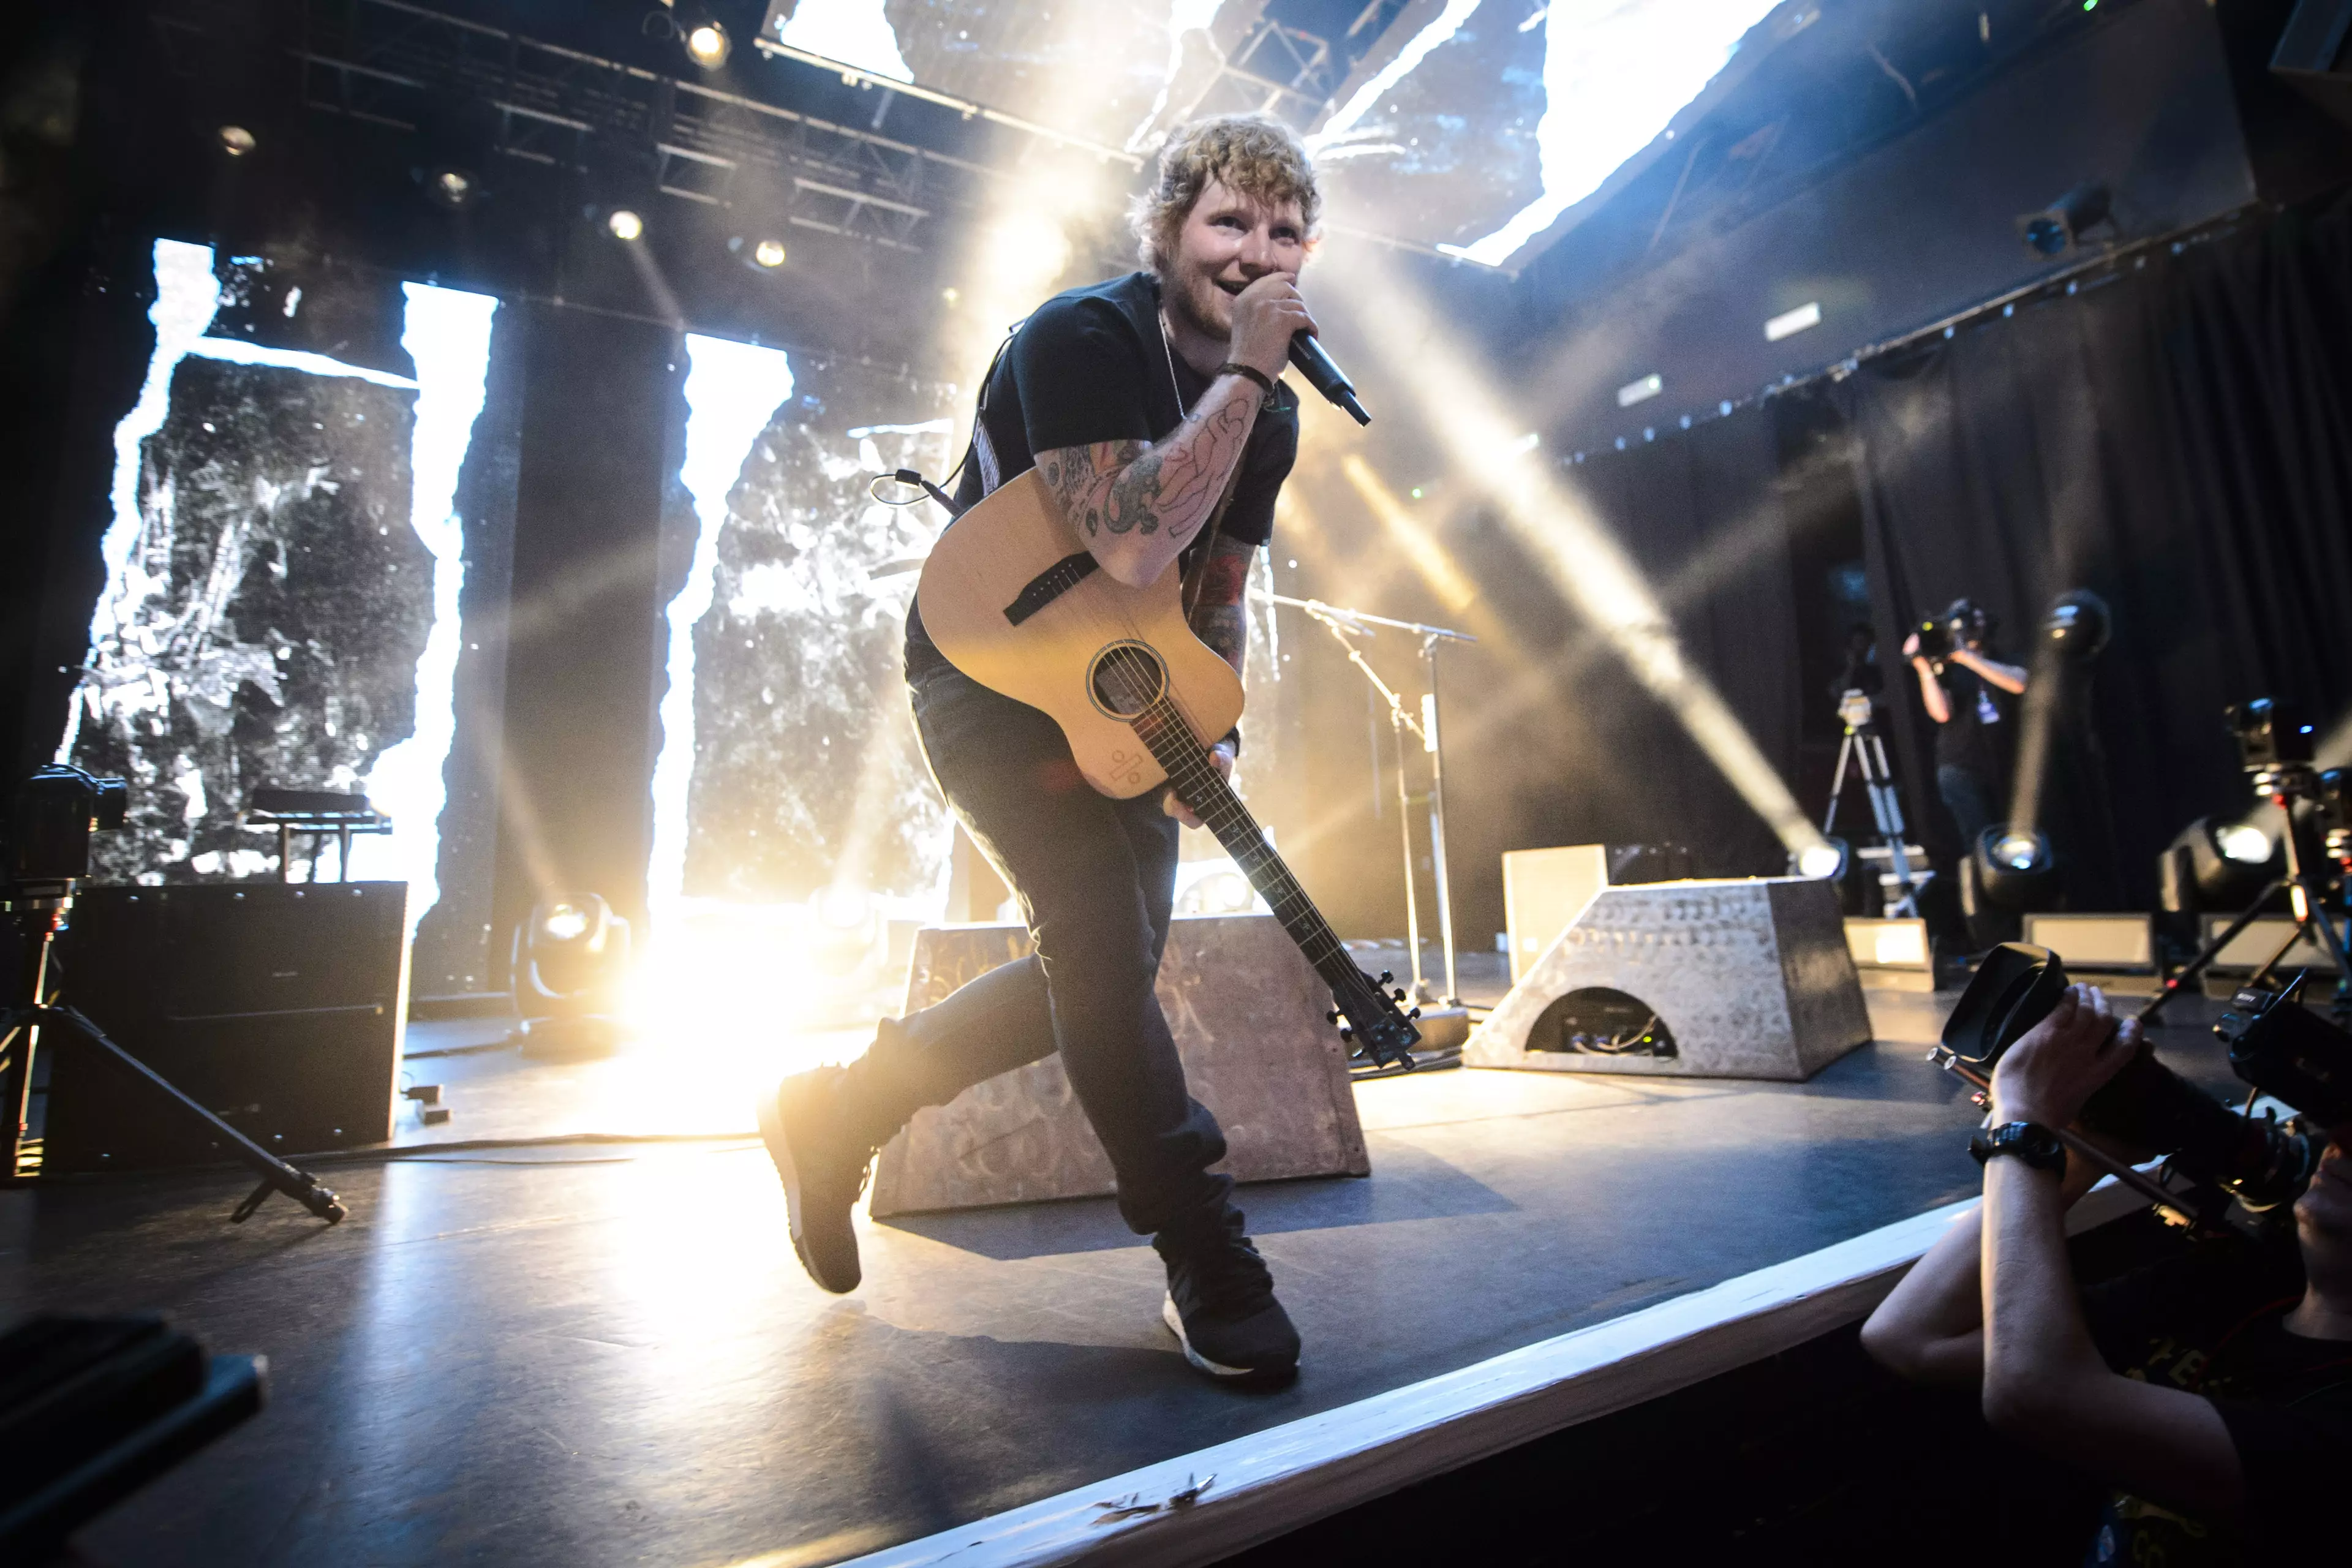 Ed Sheeran is set to work the stage in Leeds